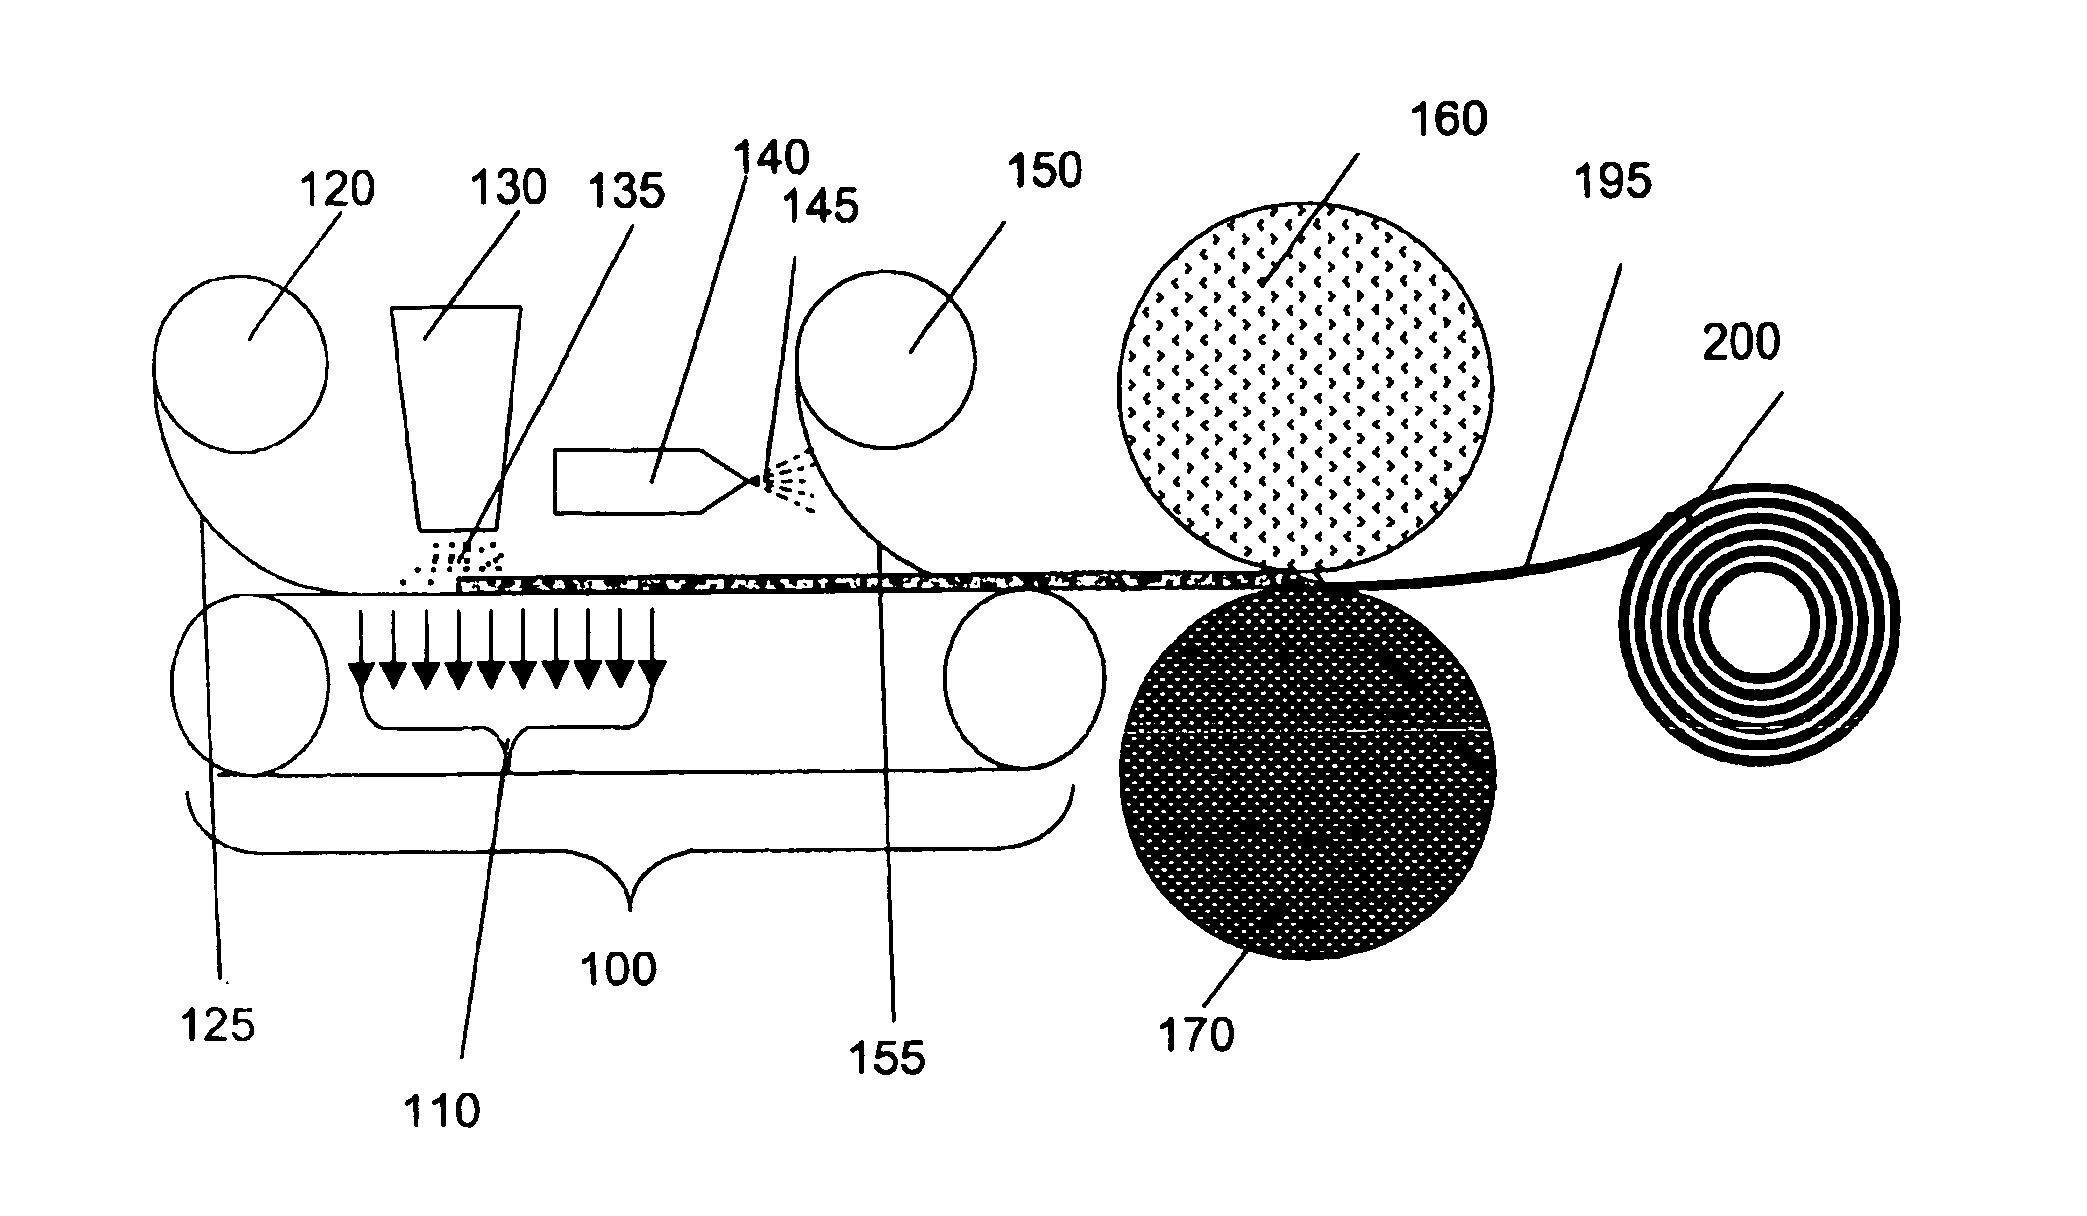 Method of making an absorbent composite and absorbent articles employing the same